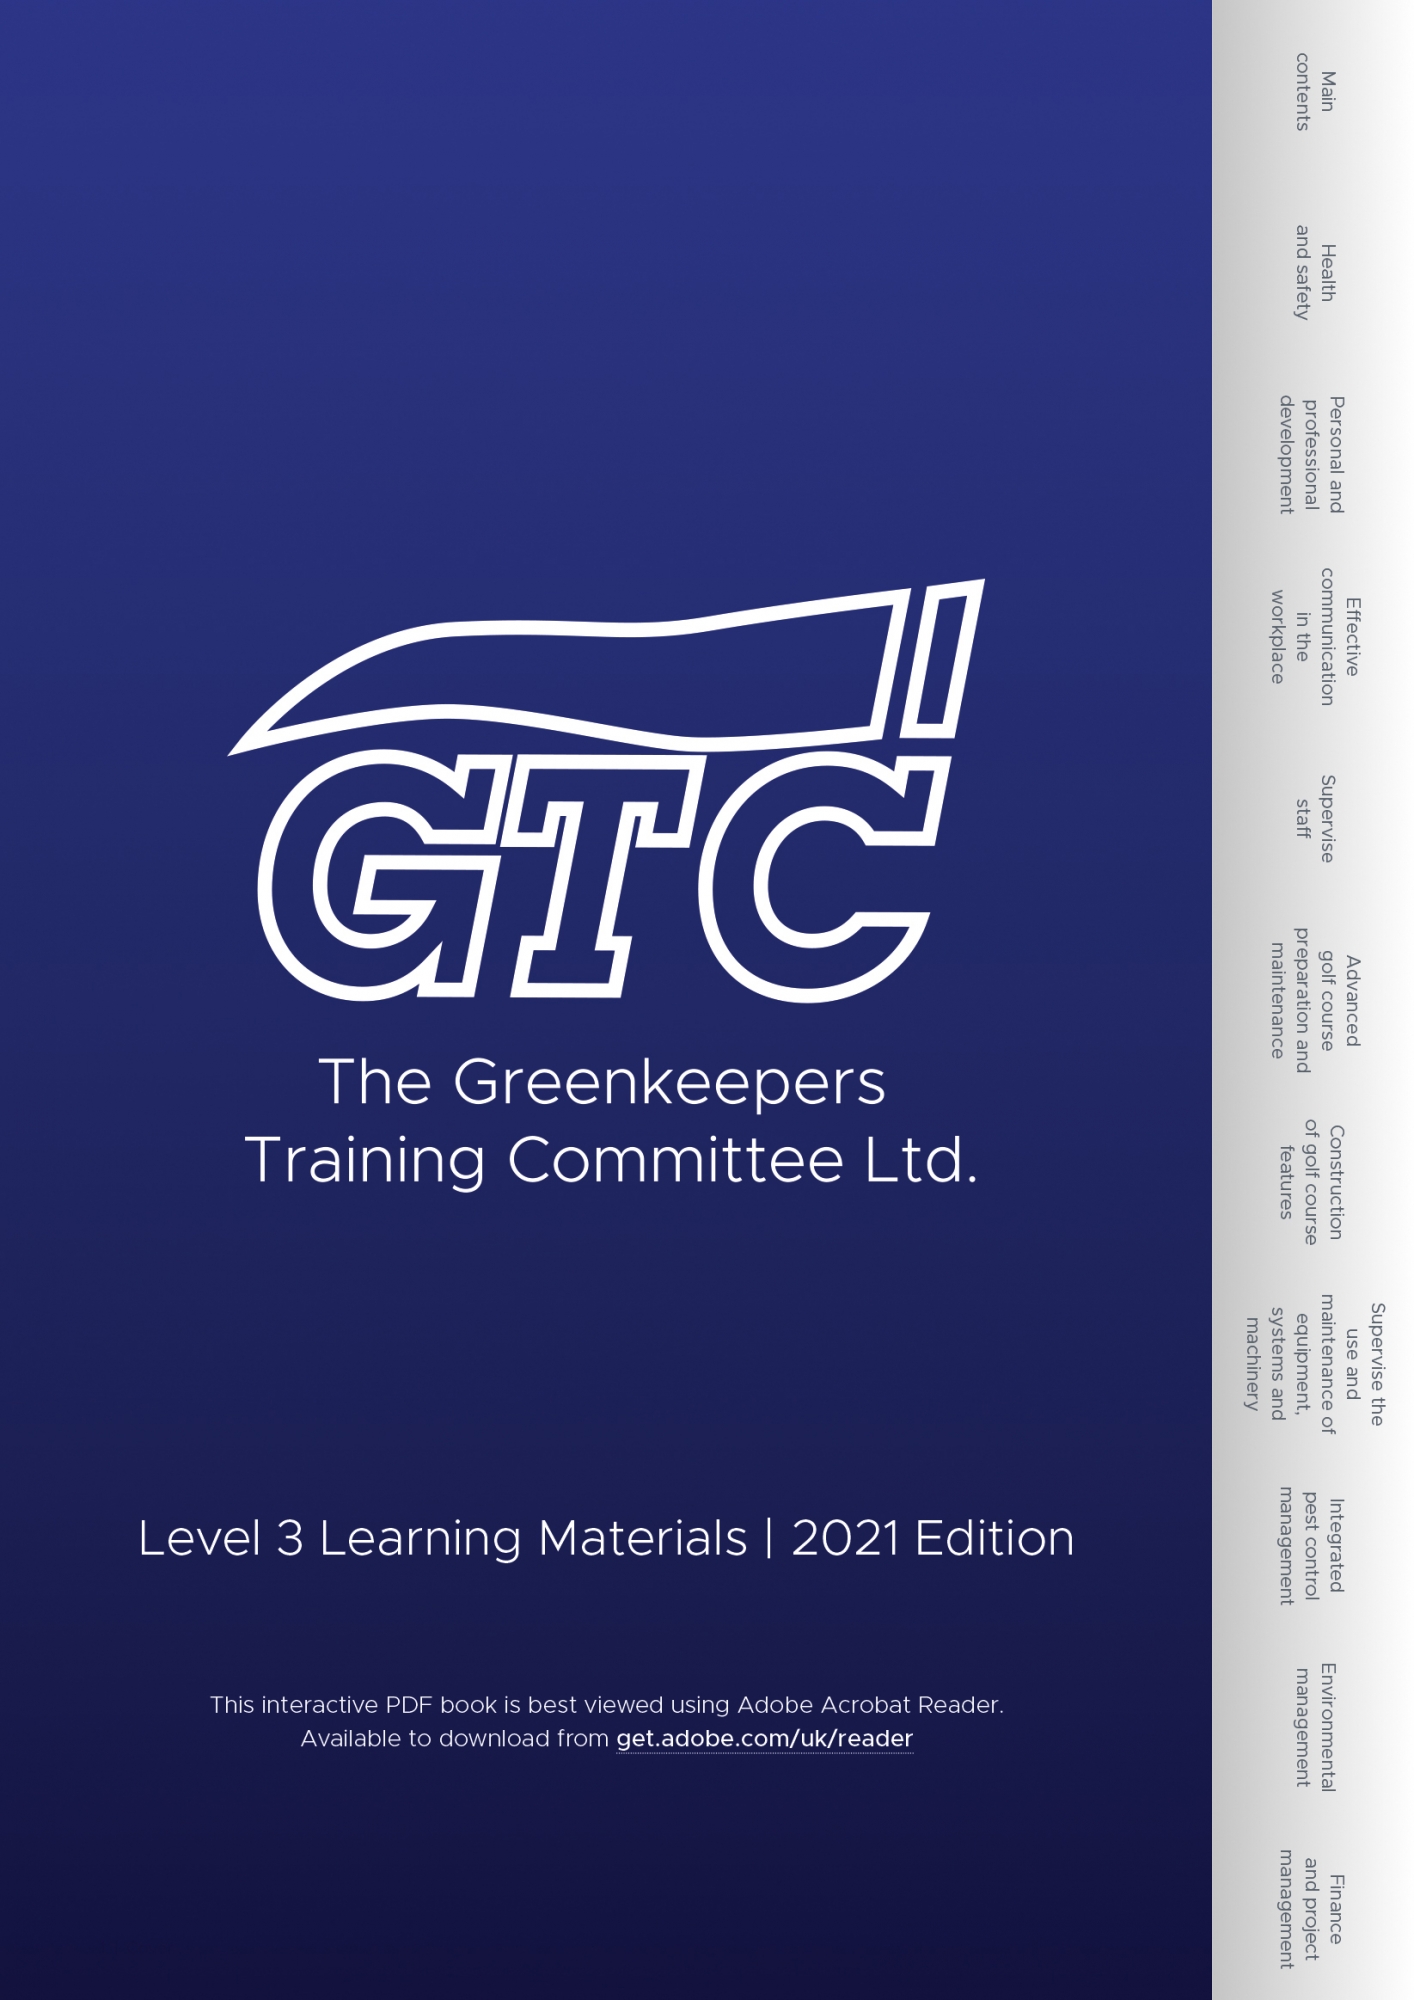 GTC Level 3 Learning Materials front cover